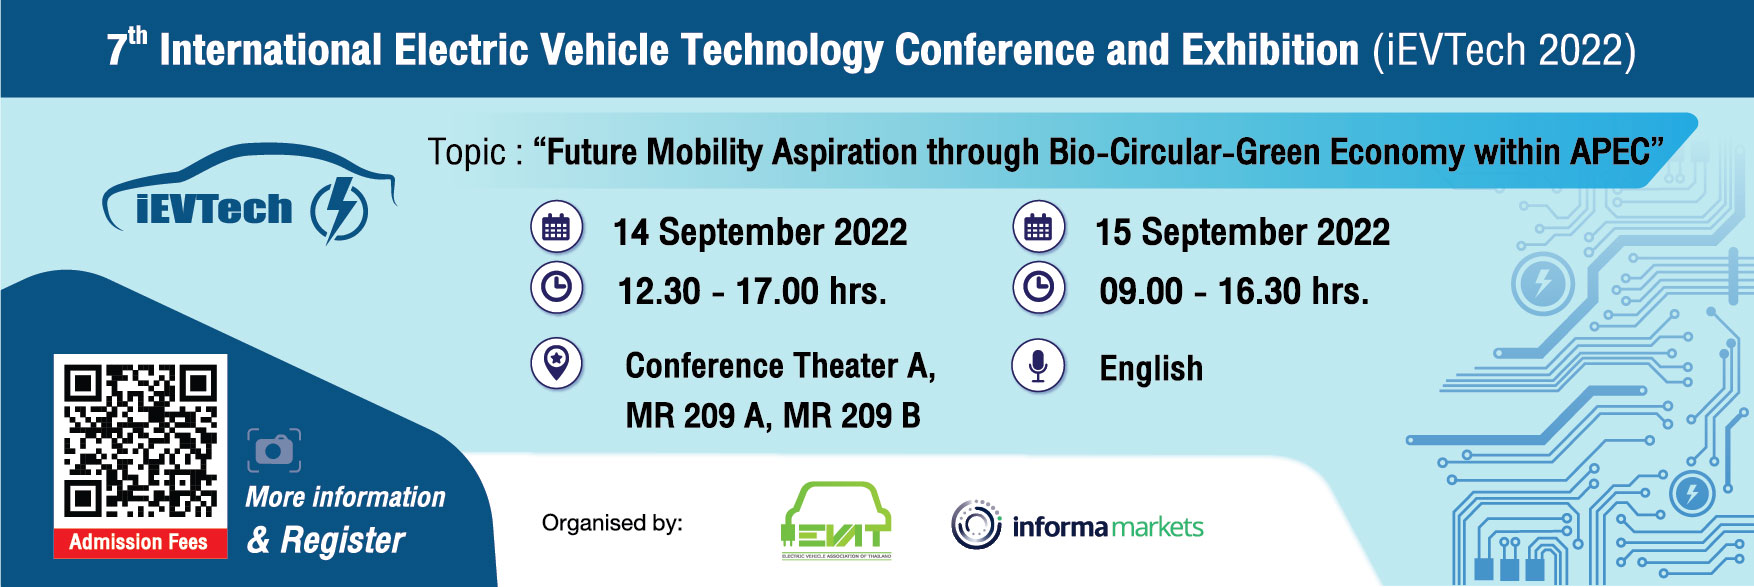 7th International Electric Vehicle Technology Conference and Exhibition (iEVTech 2022)